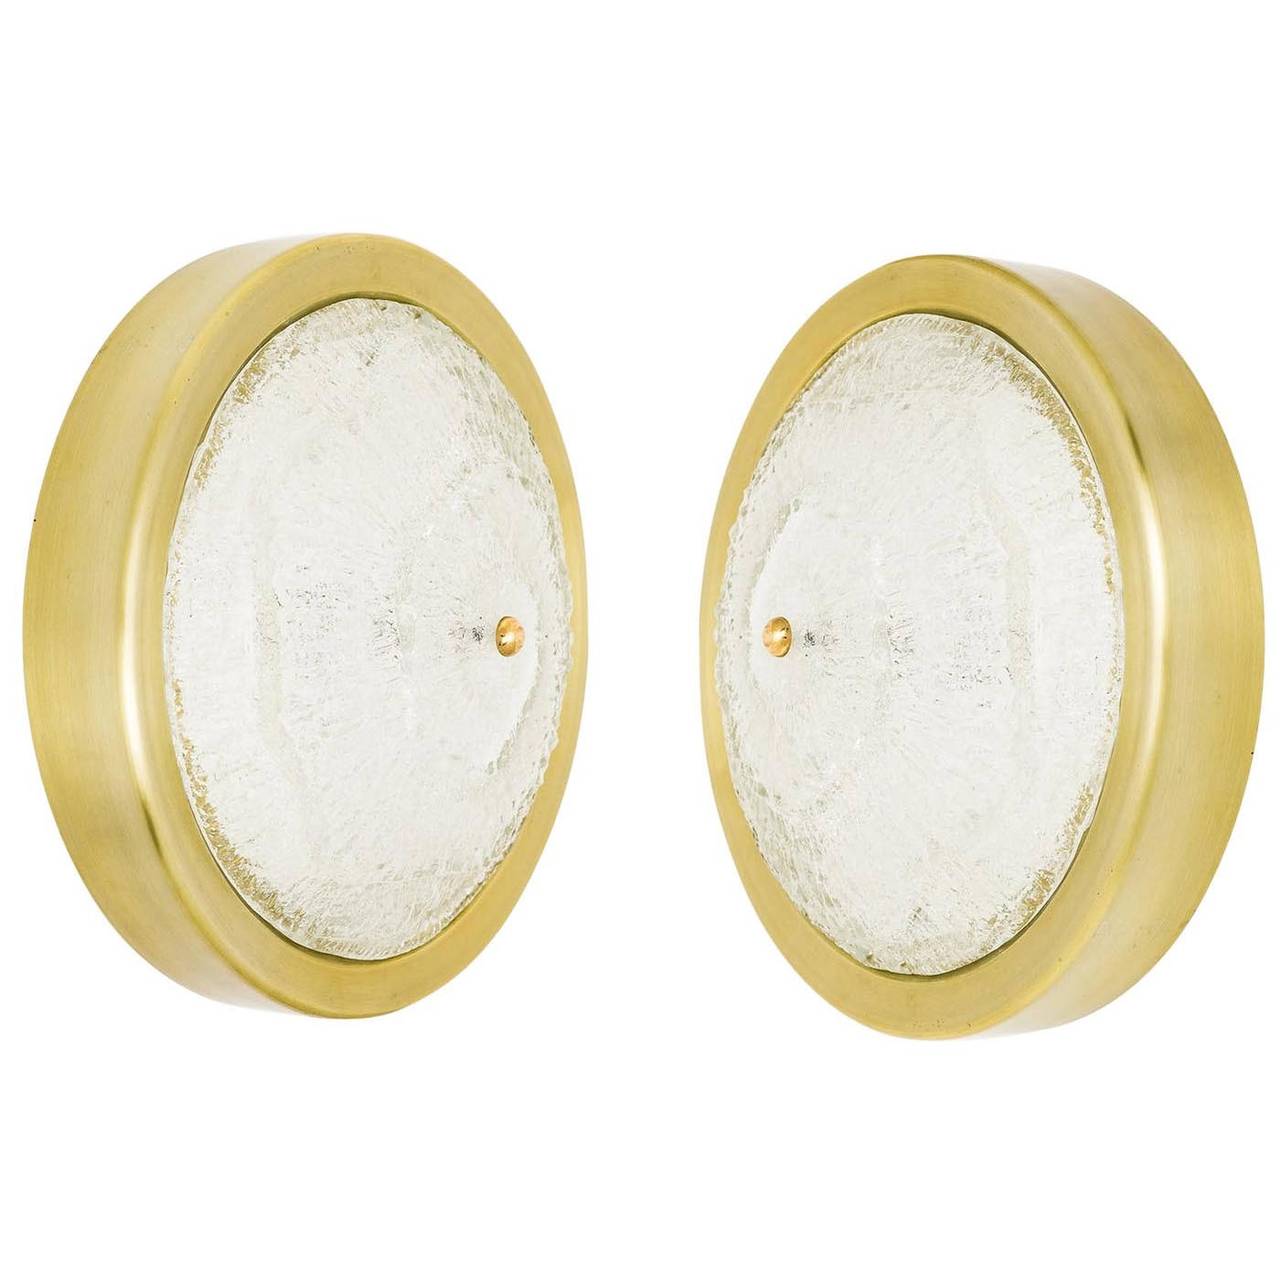 One of two beautiful frosted glass light fixtures by Kalmar. A thick textured glass is mounted with a brass bolt on a matte finished brass-plated backplate. The light can be used as ceiling or as wall lamp.
The price is per fixture. They are sold